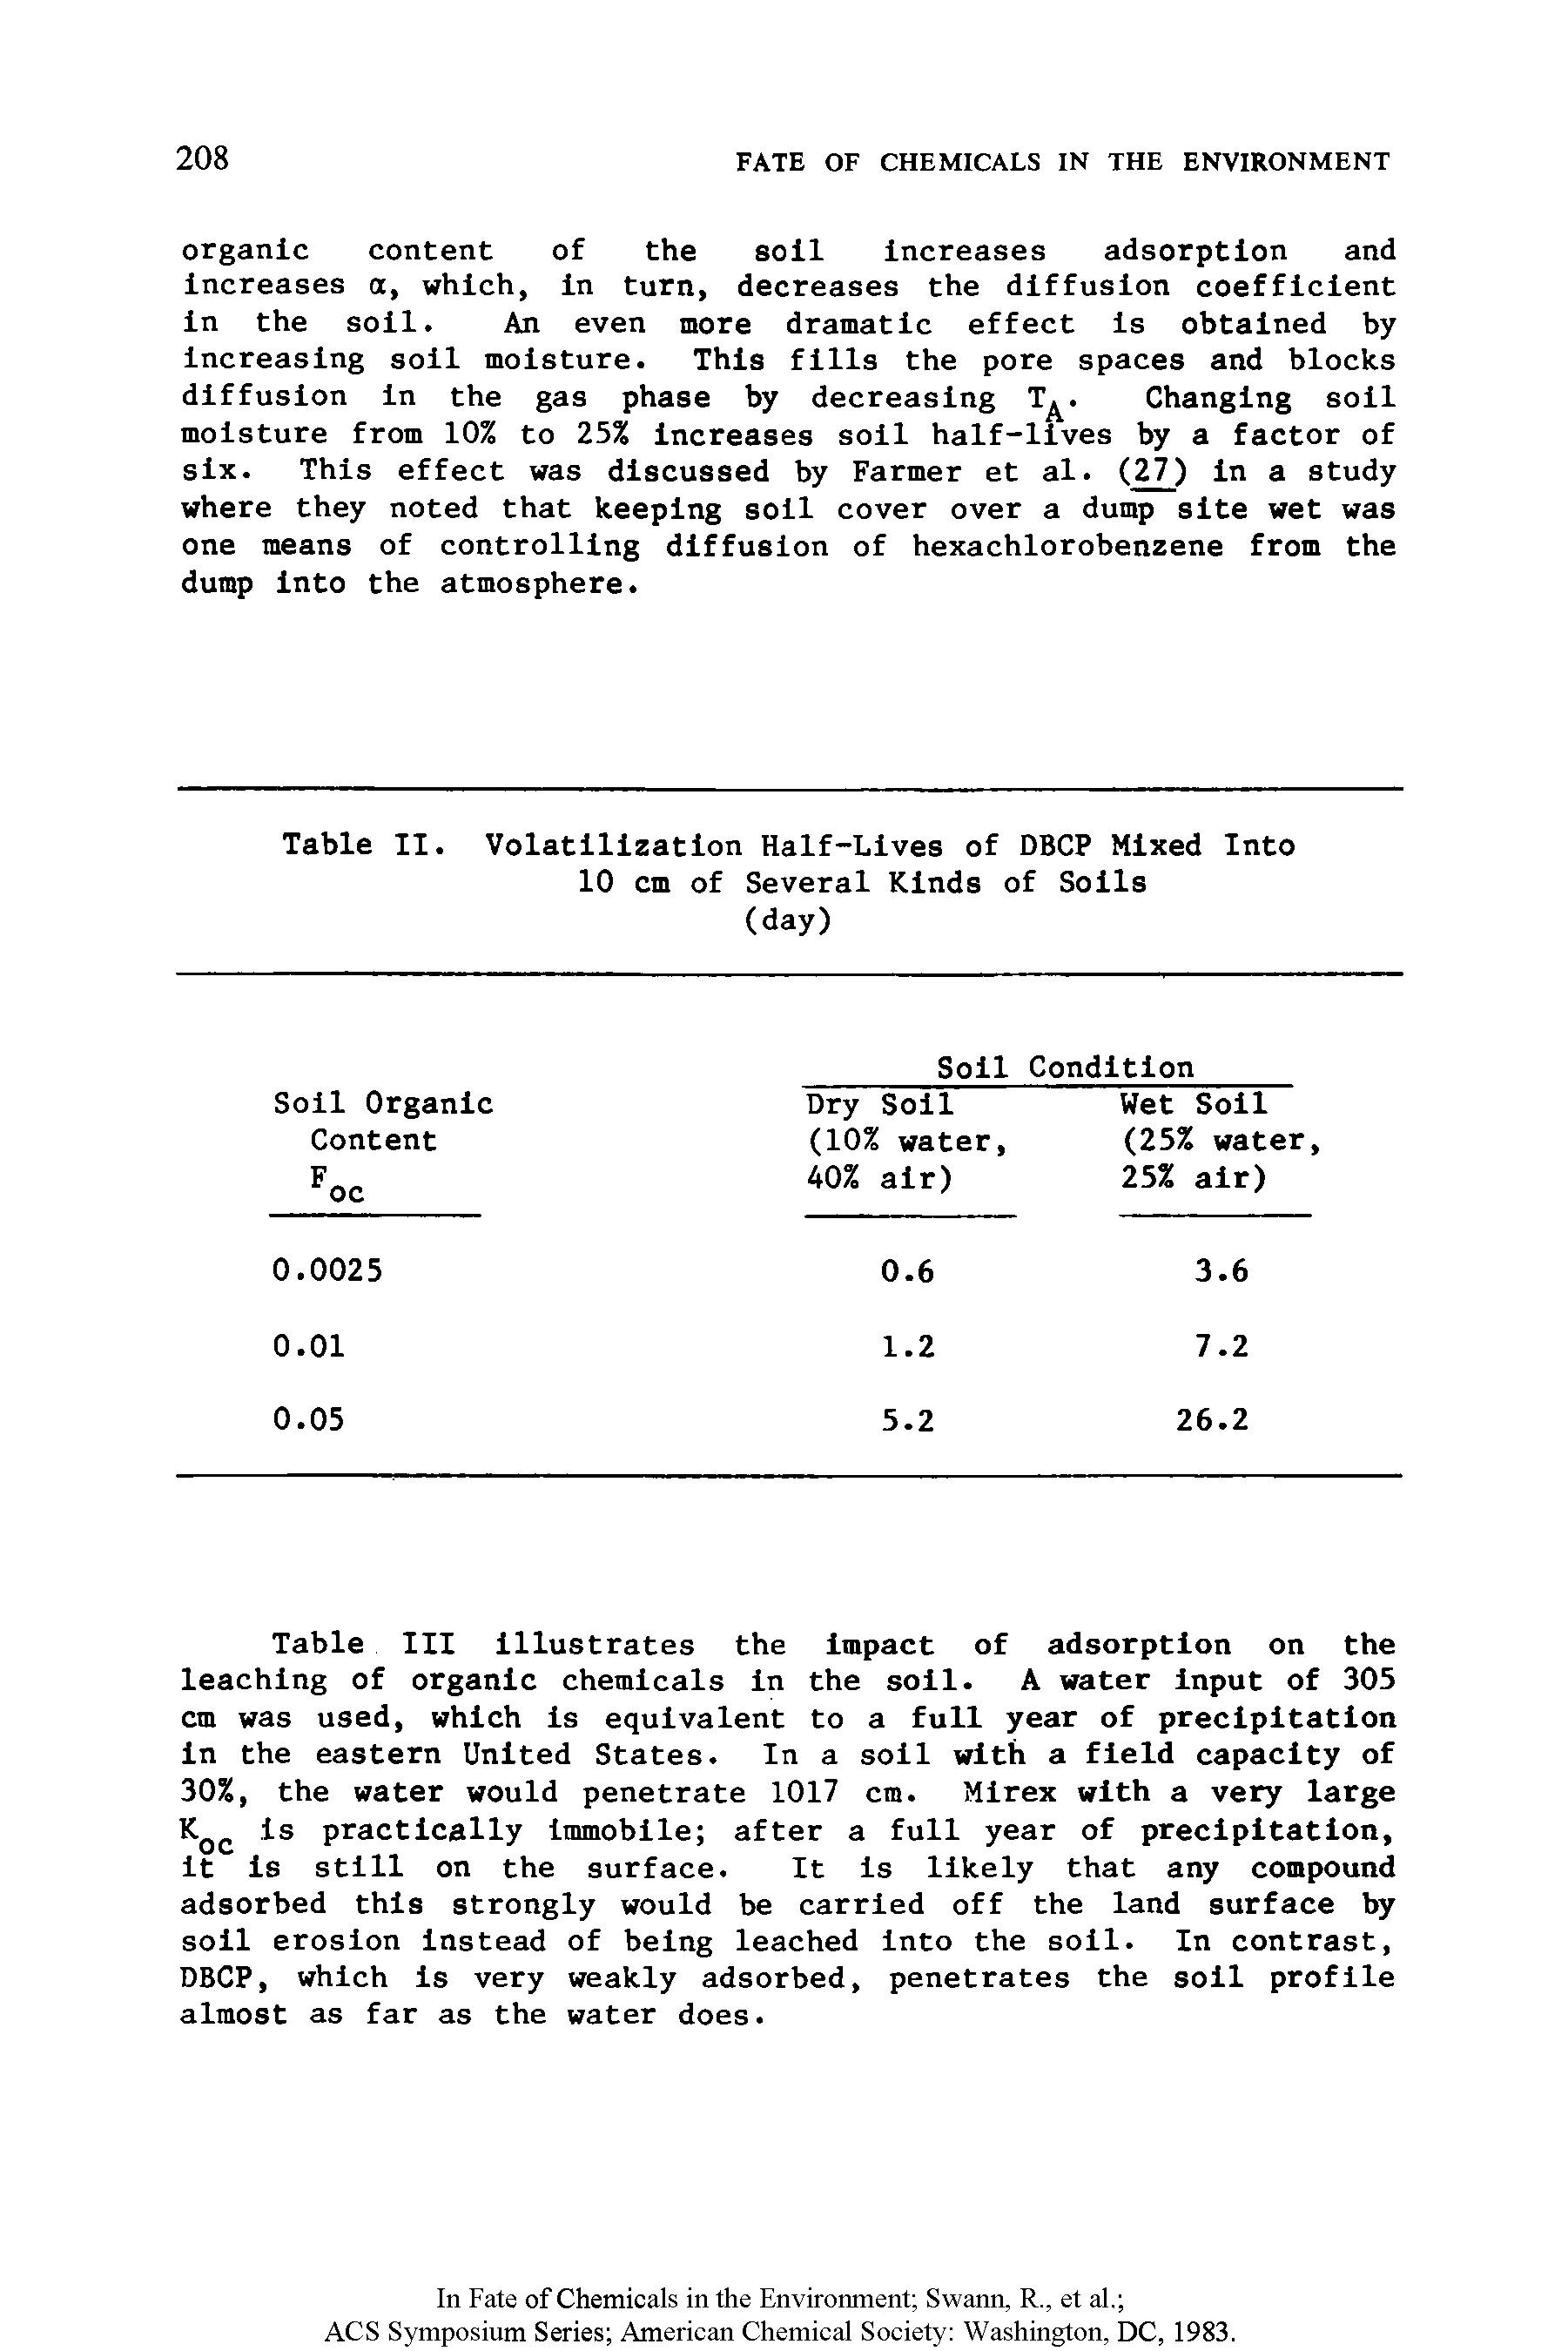 Table III illustrates the impact of adsorption on the leaching of organic chemicals in the soil. A water input of 305 cm was used, which is equivalent to a full year of precipitation in the eastern United States. In a soil with a field capacity of 30%, the water would penetrate 1017 cm. Mirex with a very large Kqc is practically immobile after a full year of precipitation, it is still on the surface. It is likely that any compound adsorbed this strongly would be carried off the land surface by soil erosion instead of being leached into the soil. In contrast, DBCP, which is very weakly adsorbed, penetrates the soil profile almost as far as the water does.